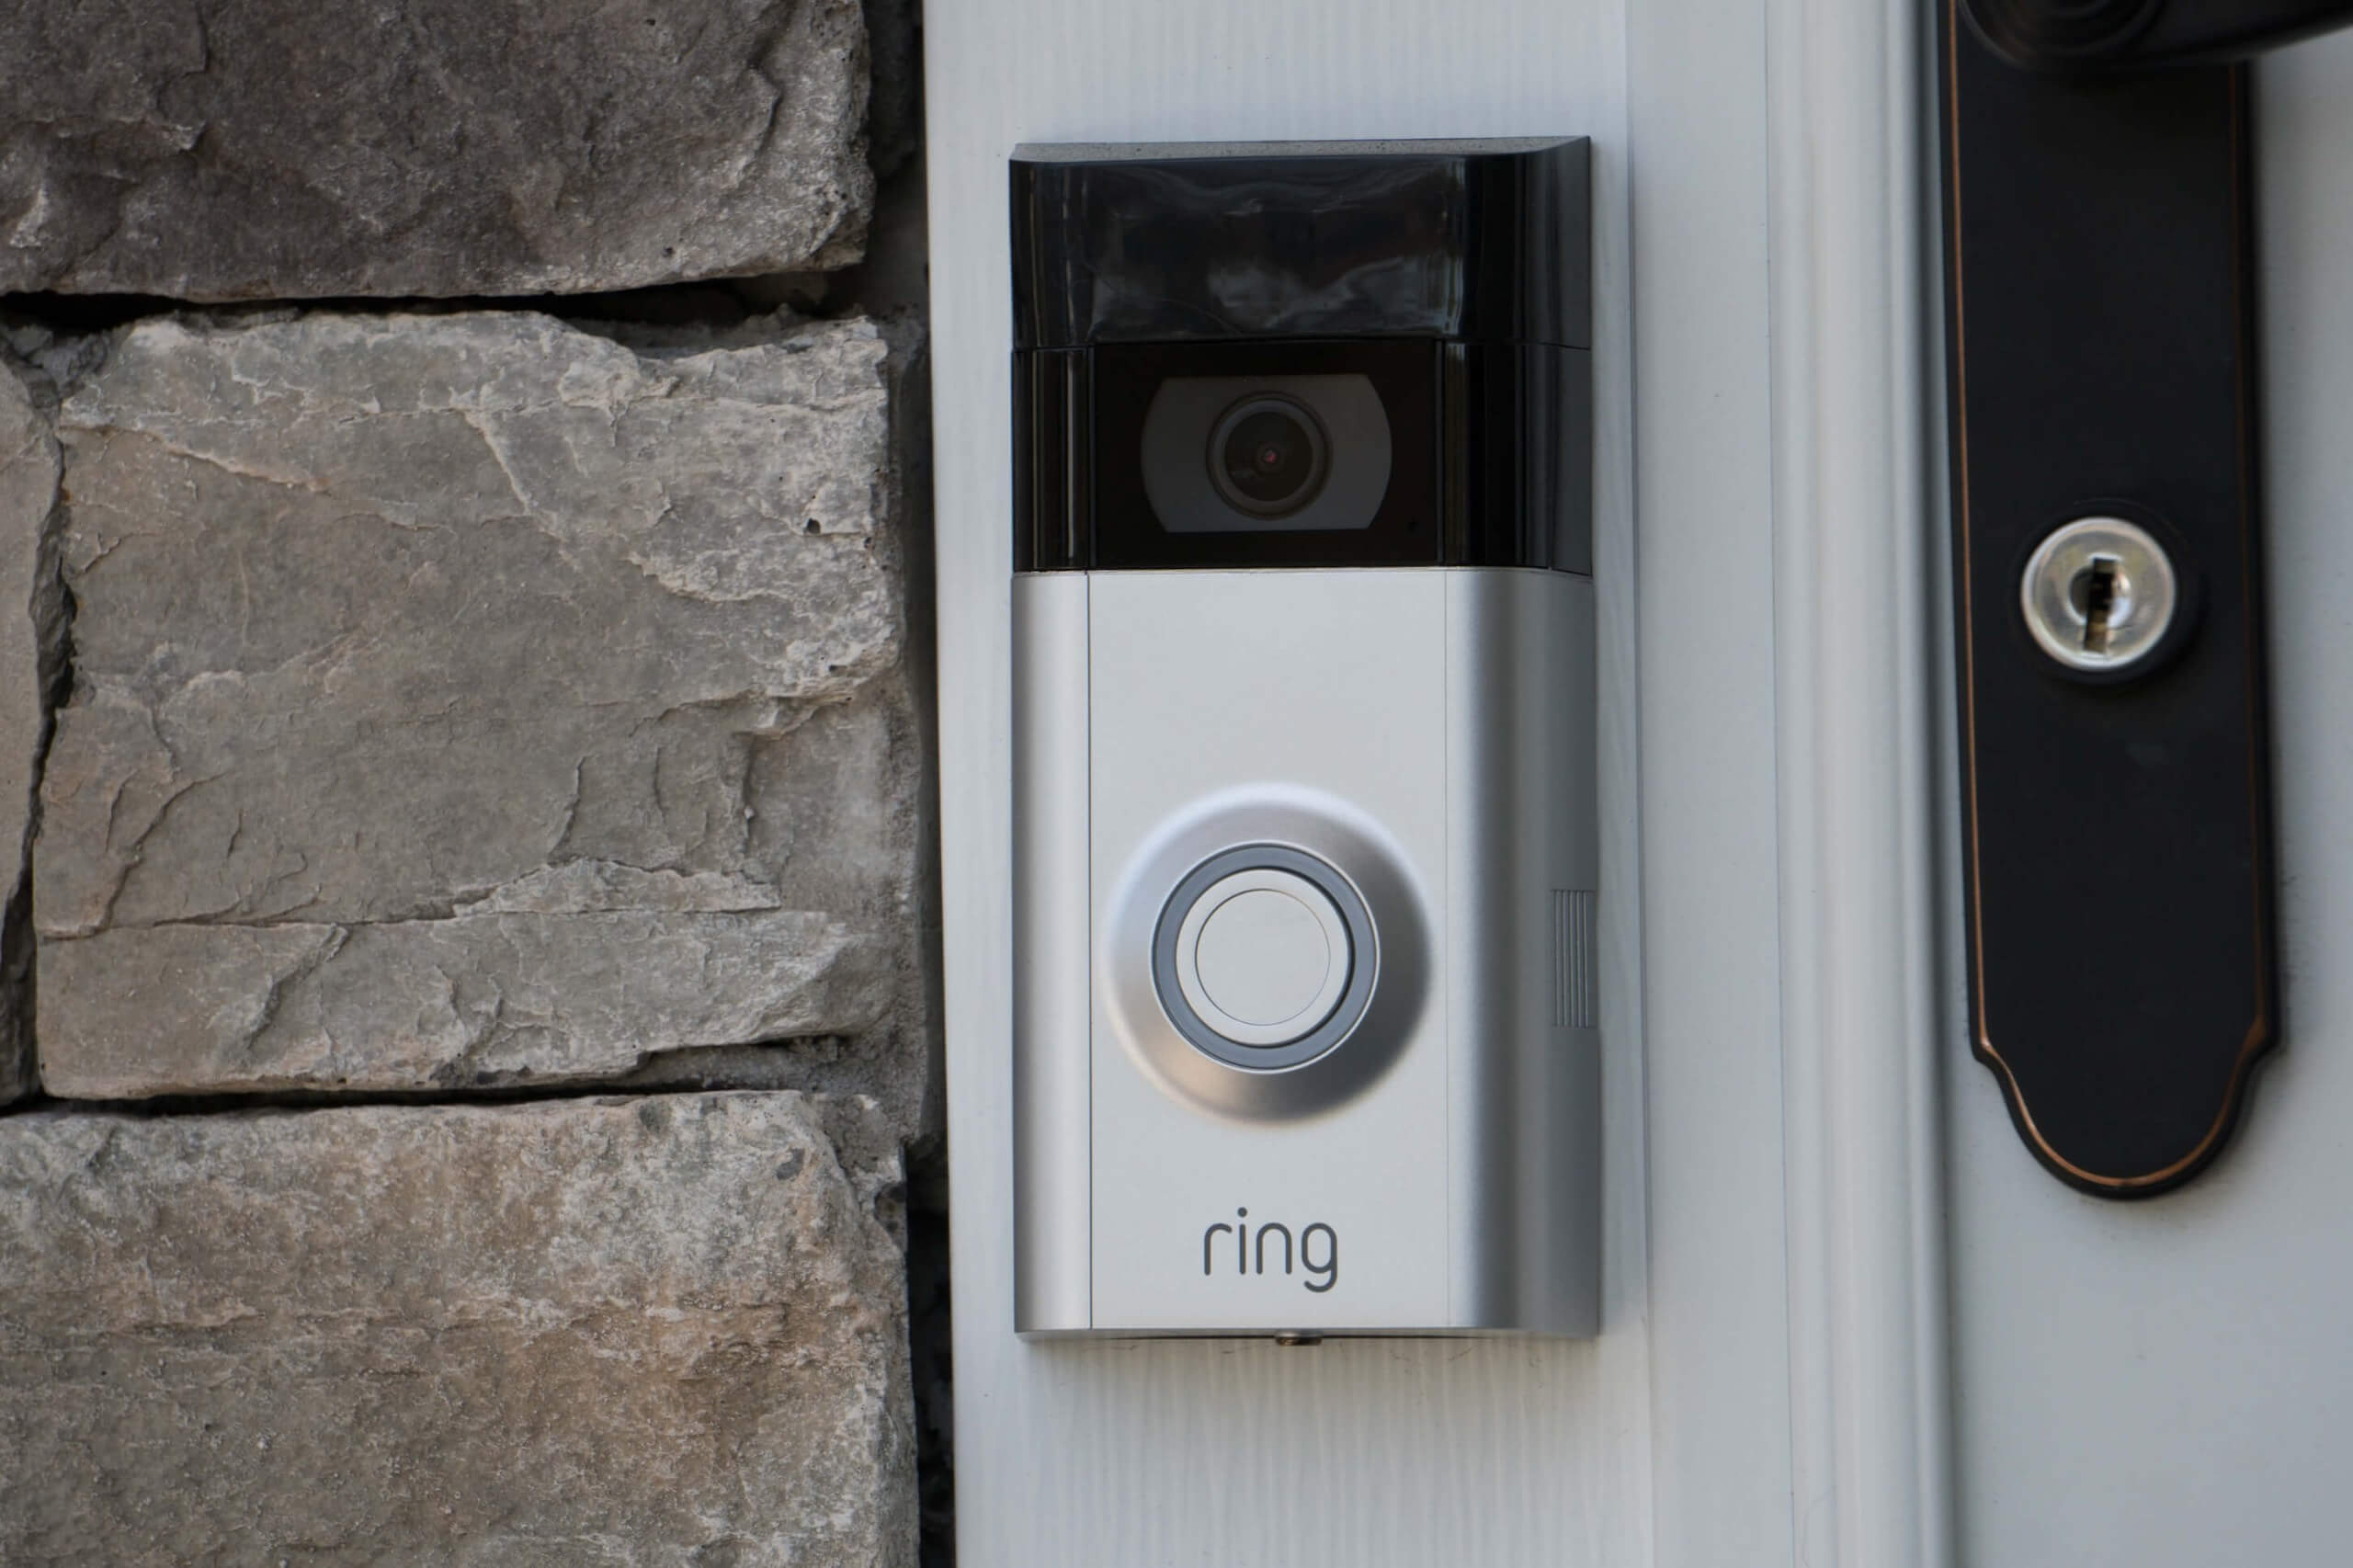 Amazon reportedly aides police in gaining Ring footage without a warrant